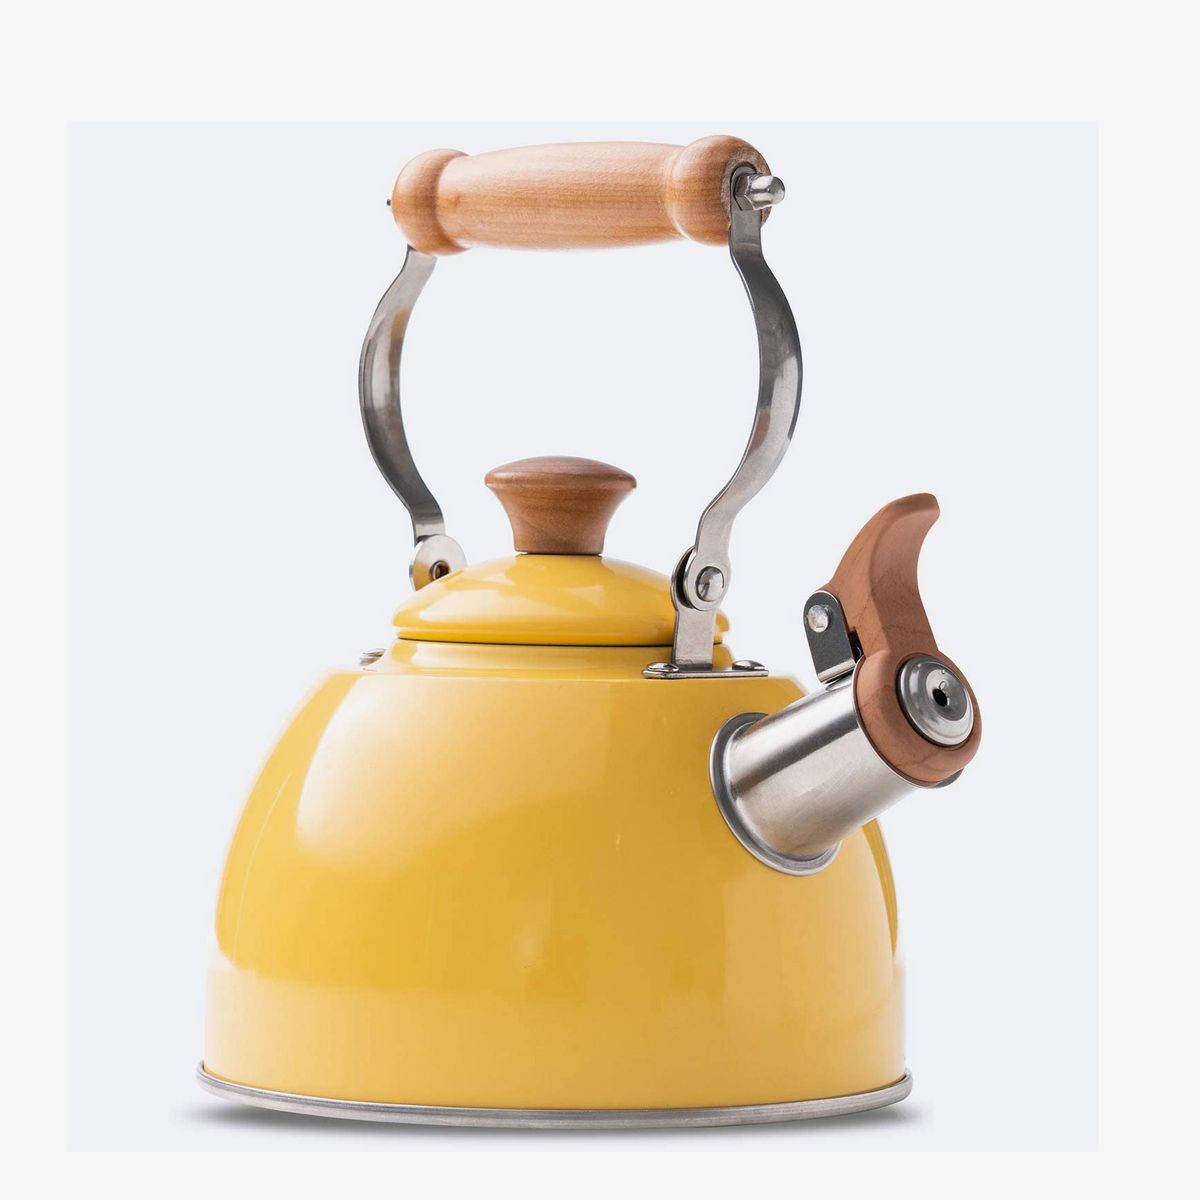 Enamel Stainless Steel Whistling Kettle 2,5L Hob Stove Gas Induction Sunflowers